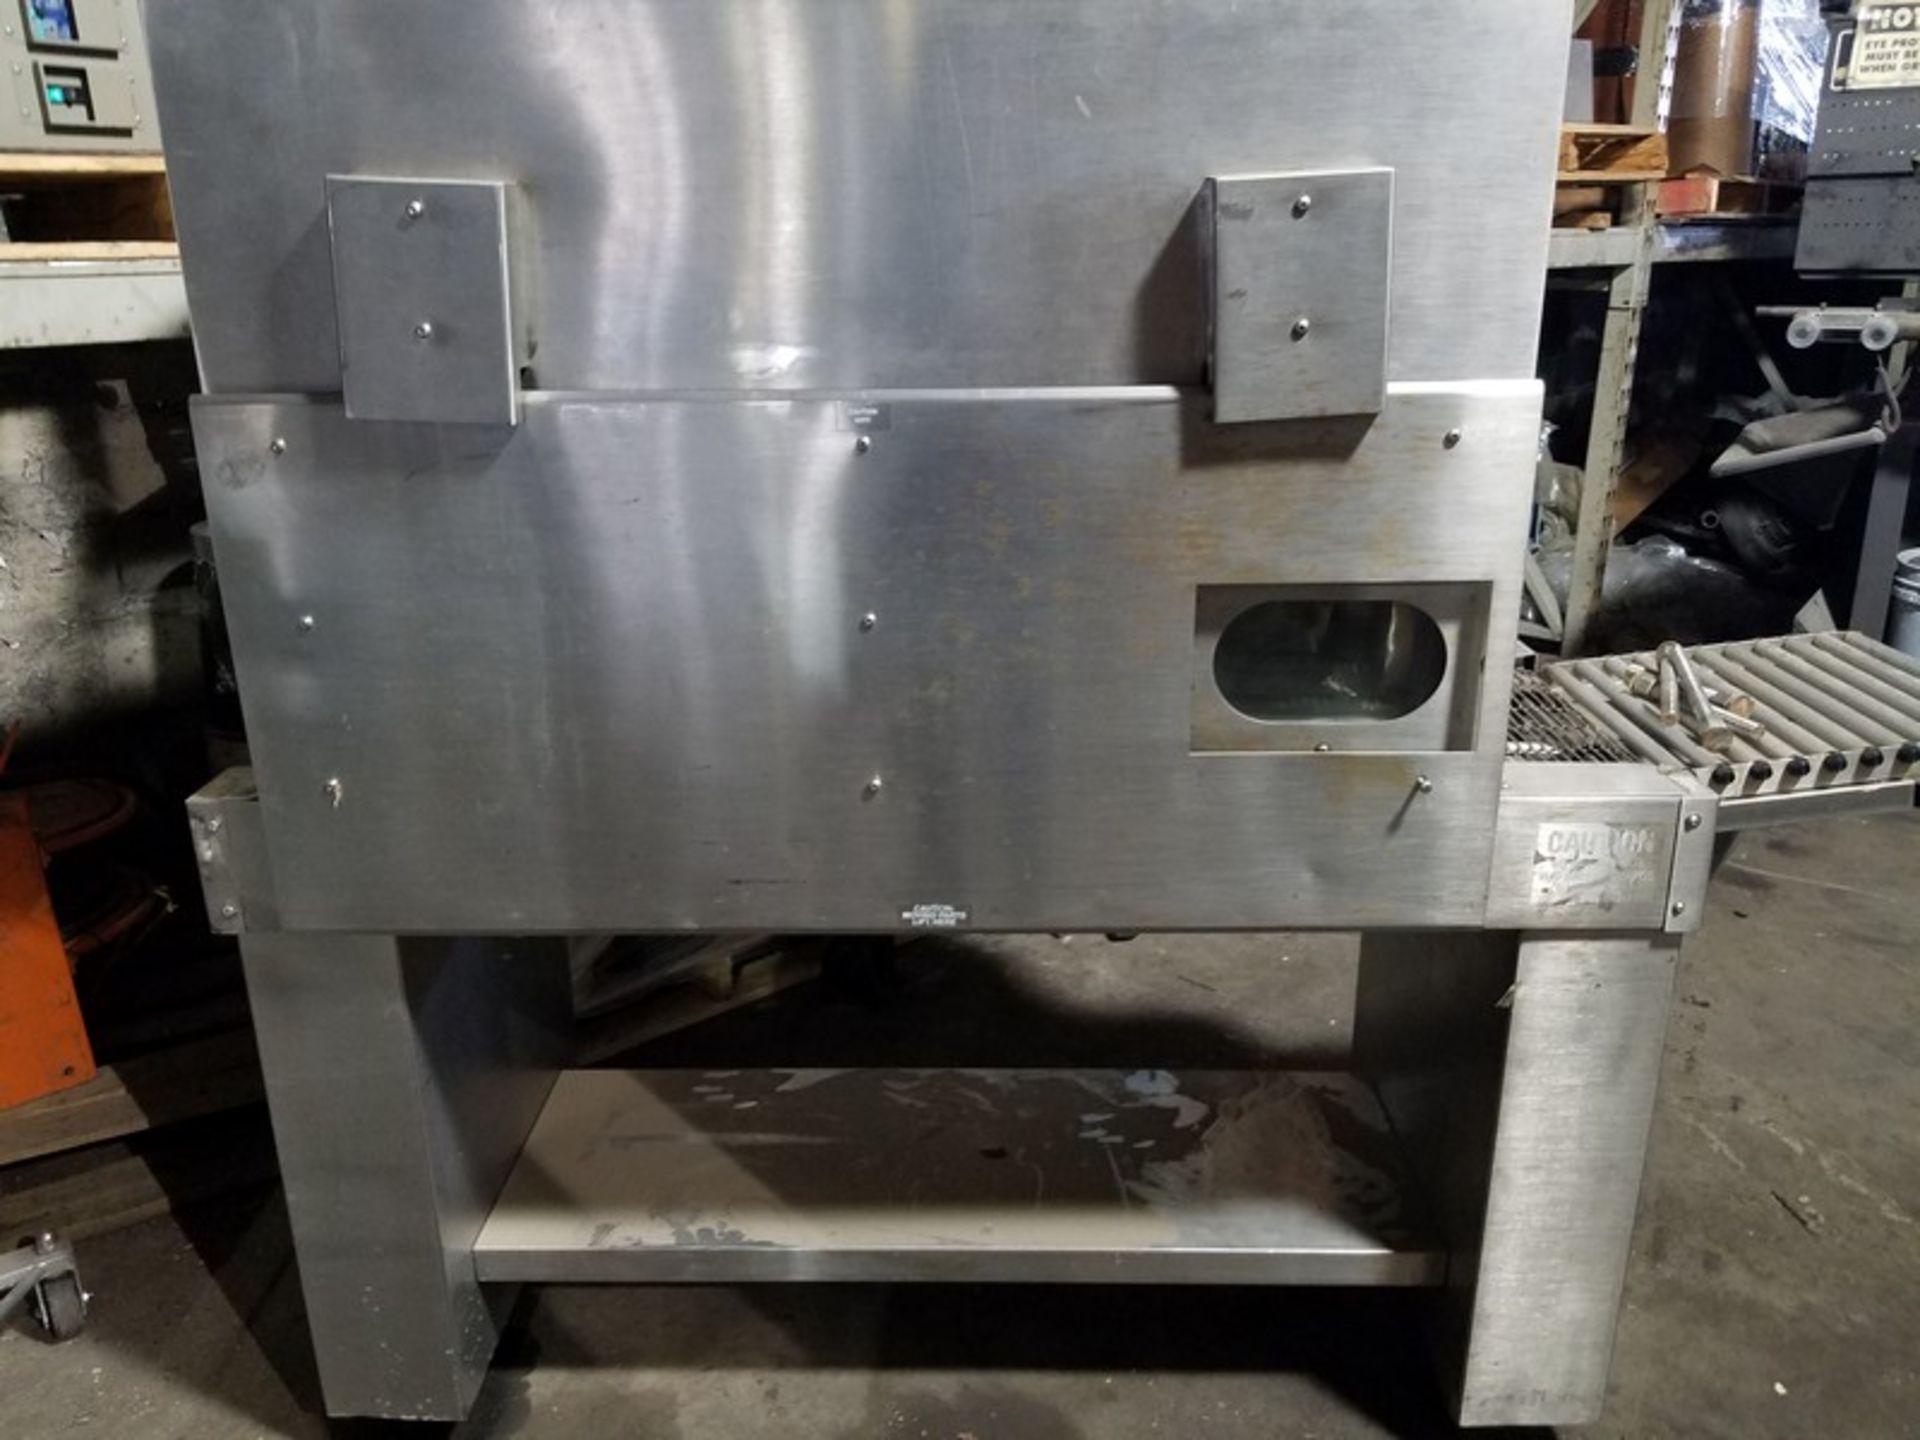 Eastey S/S Tunnel, Model FR1620-45, Volt 220, 3 Phase (Located Fort Worth, TX) (Loading Fee $250)